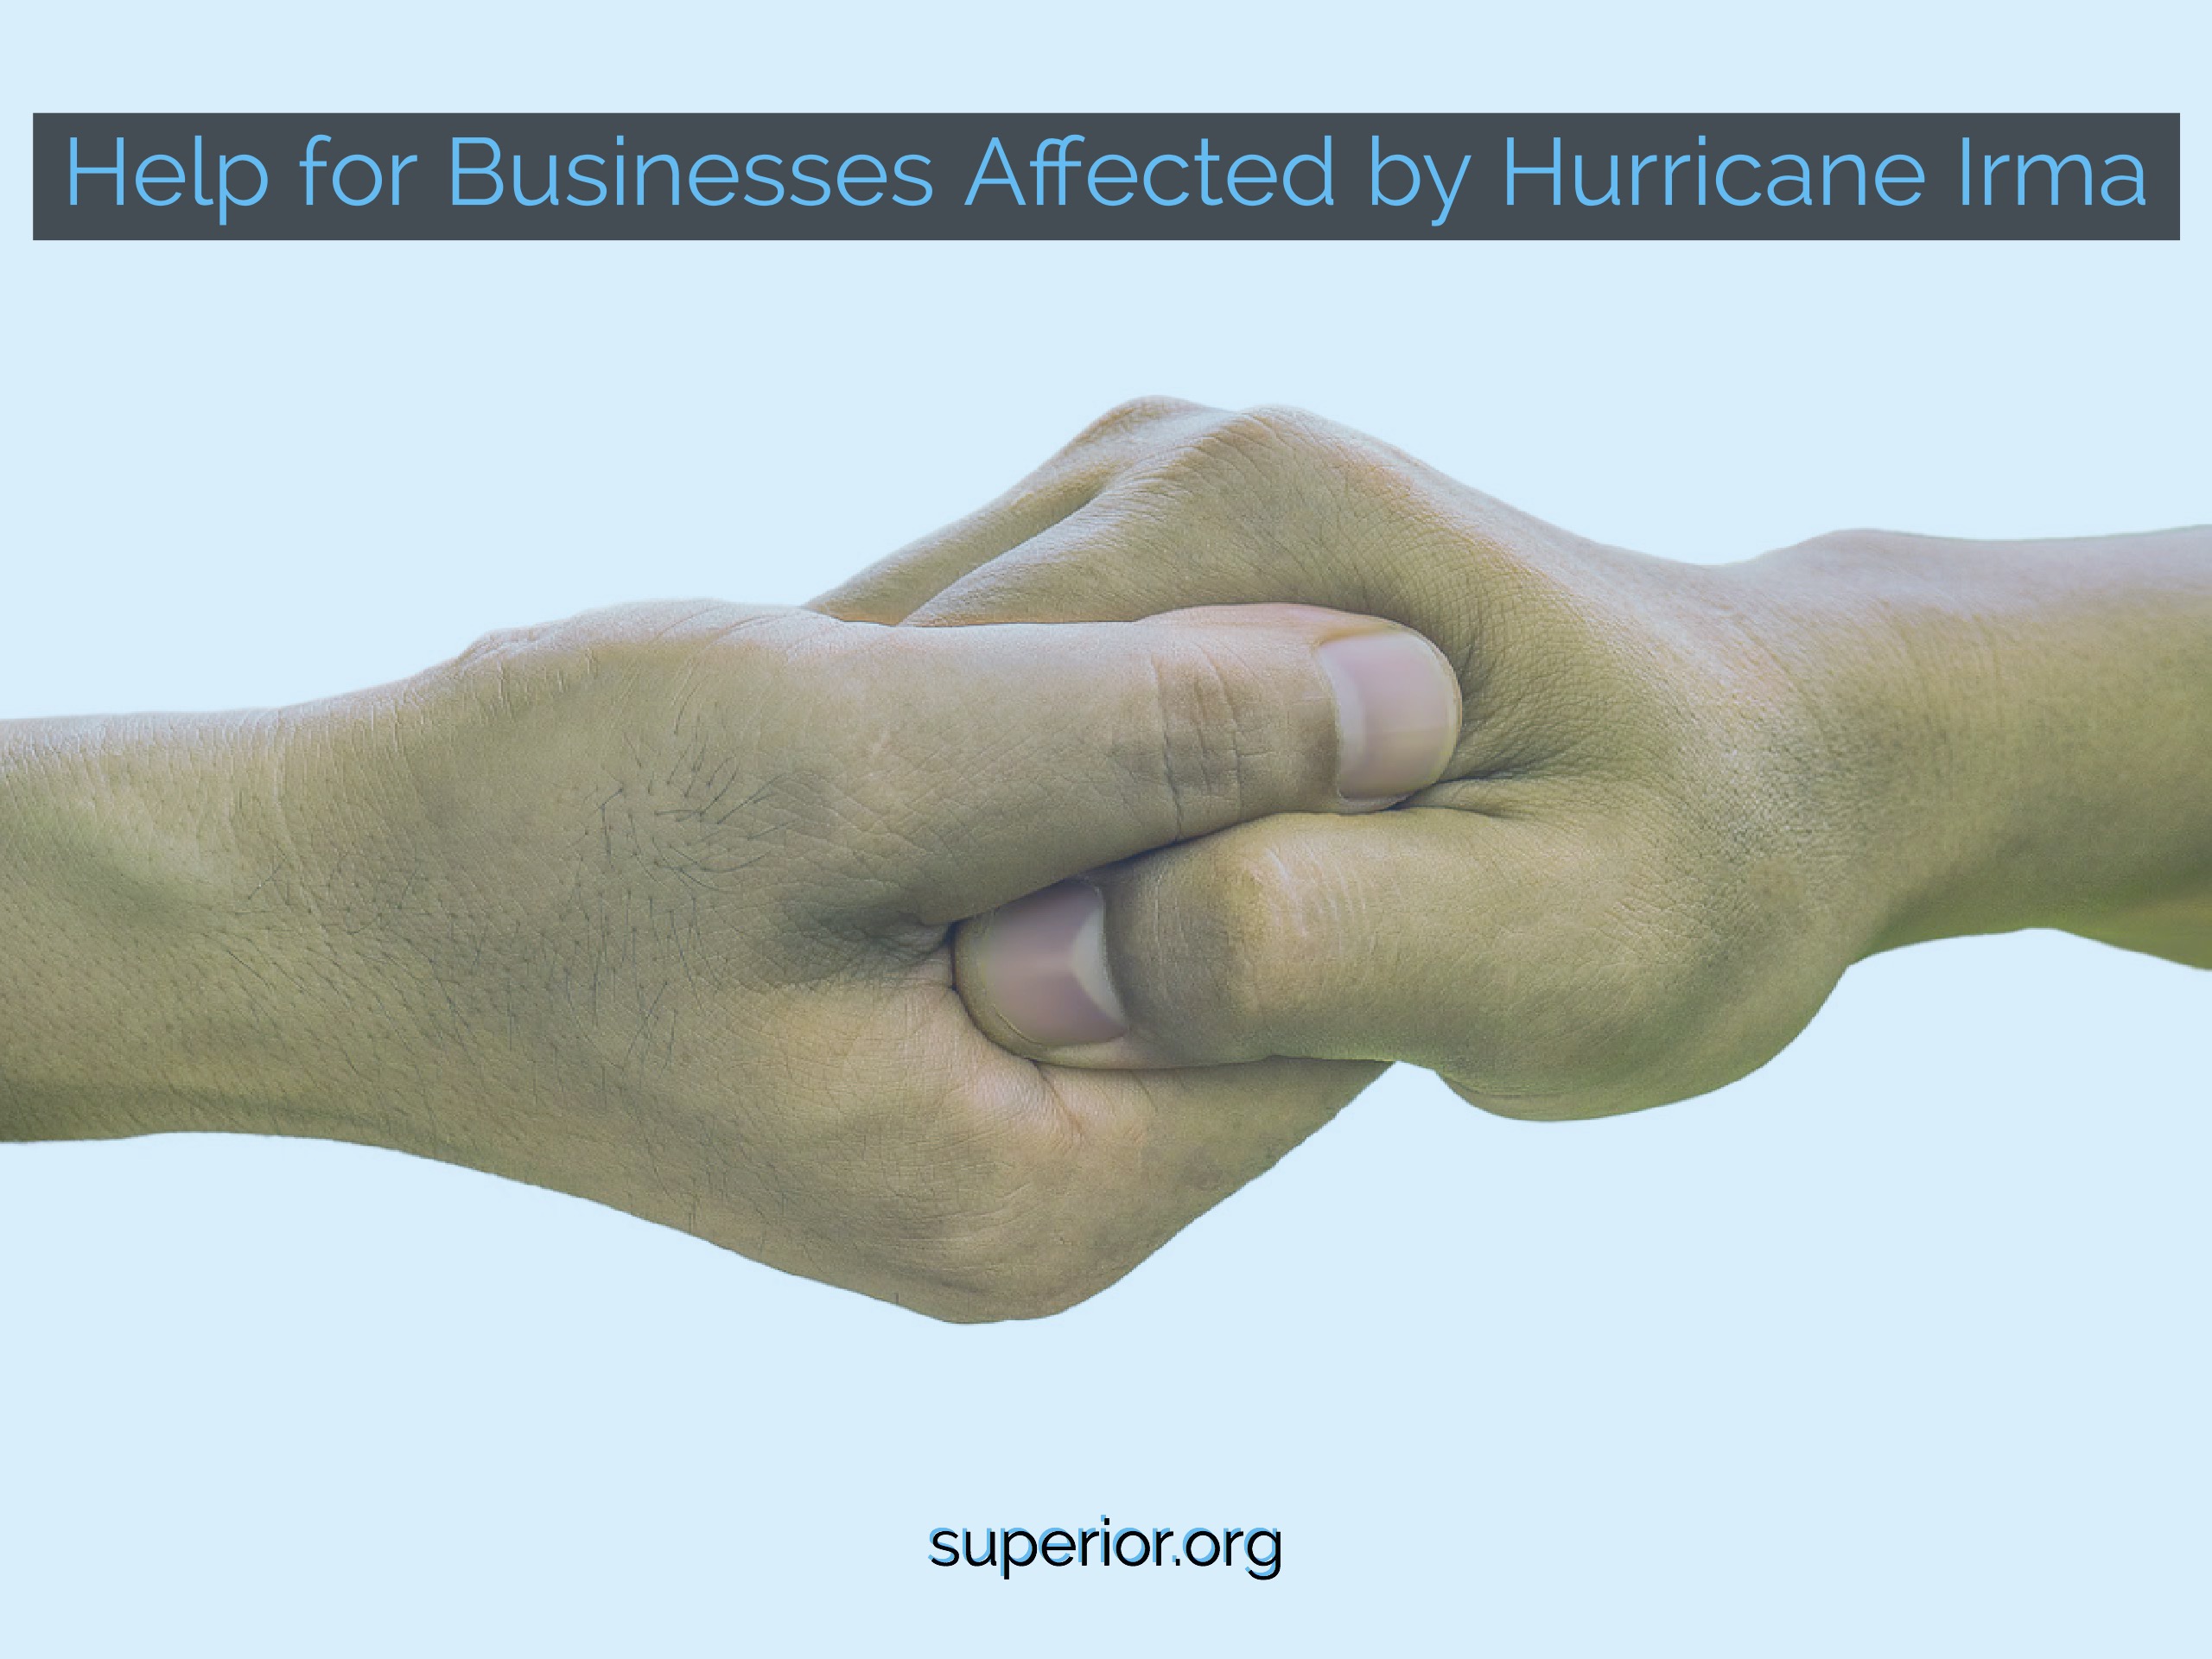 4 Sources of Help for Businesses Affected by Hurricane Irma